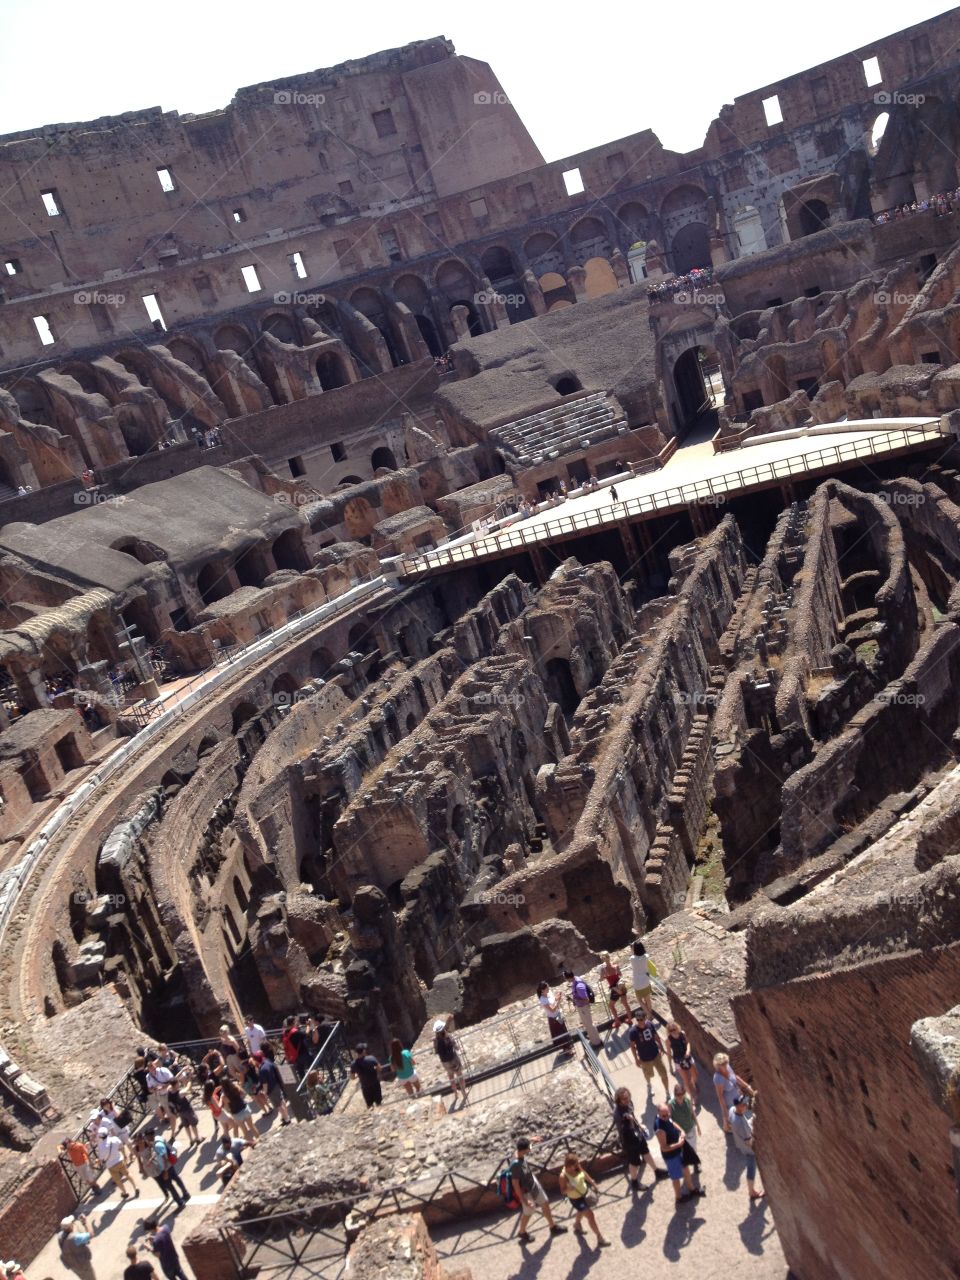 View of the inside of the arena of the old Roman coliseum